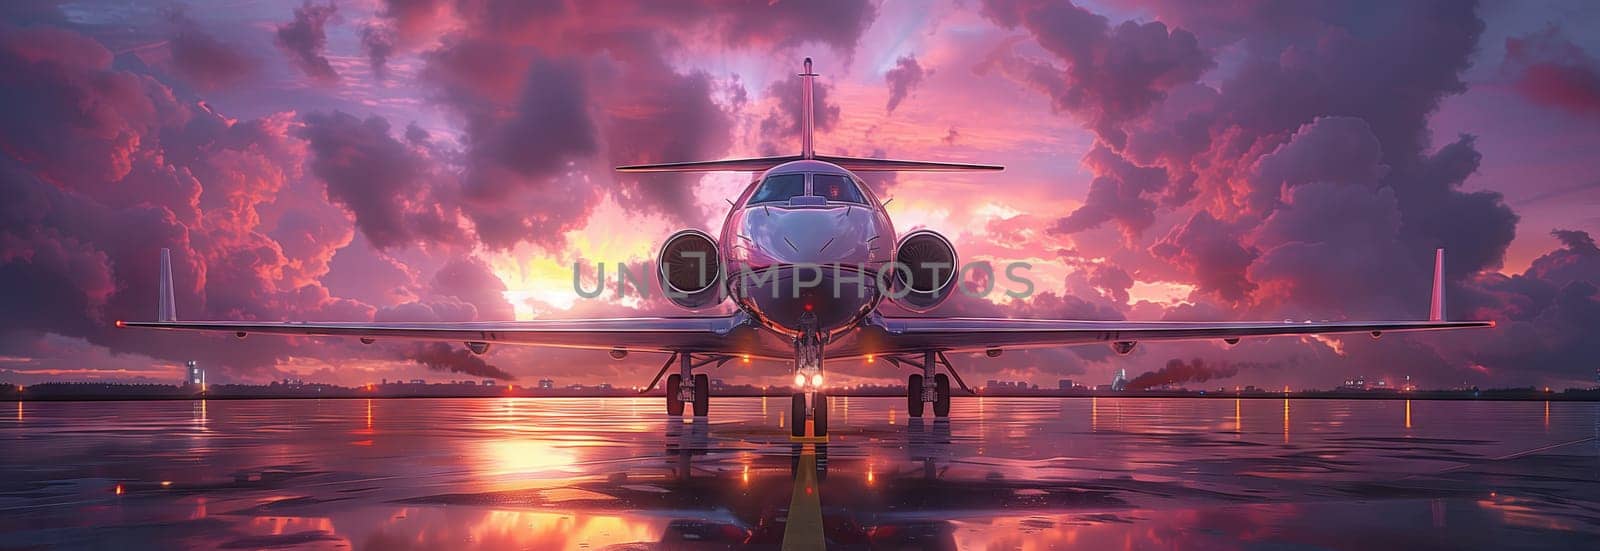 The purple sky faded into magenta hues as the plane sat on the wet runway at sunset, surrounded by a landscape of water reflecting the automotive lighting